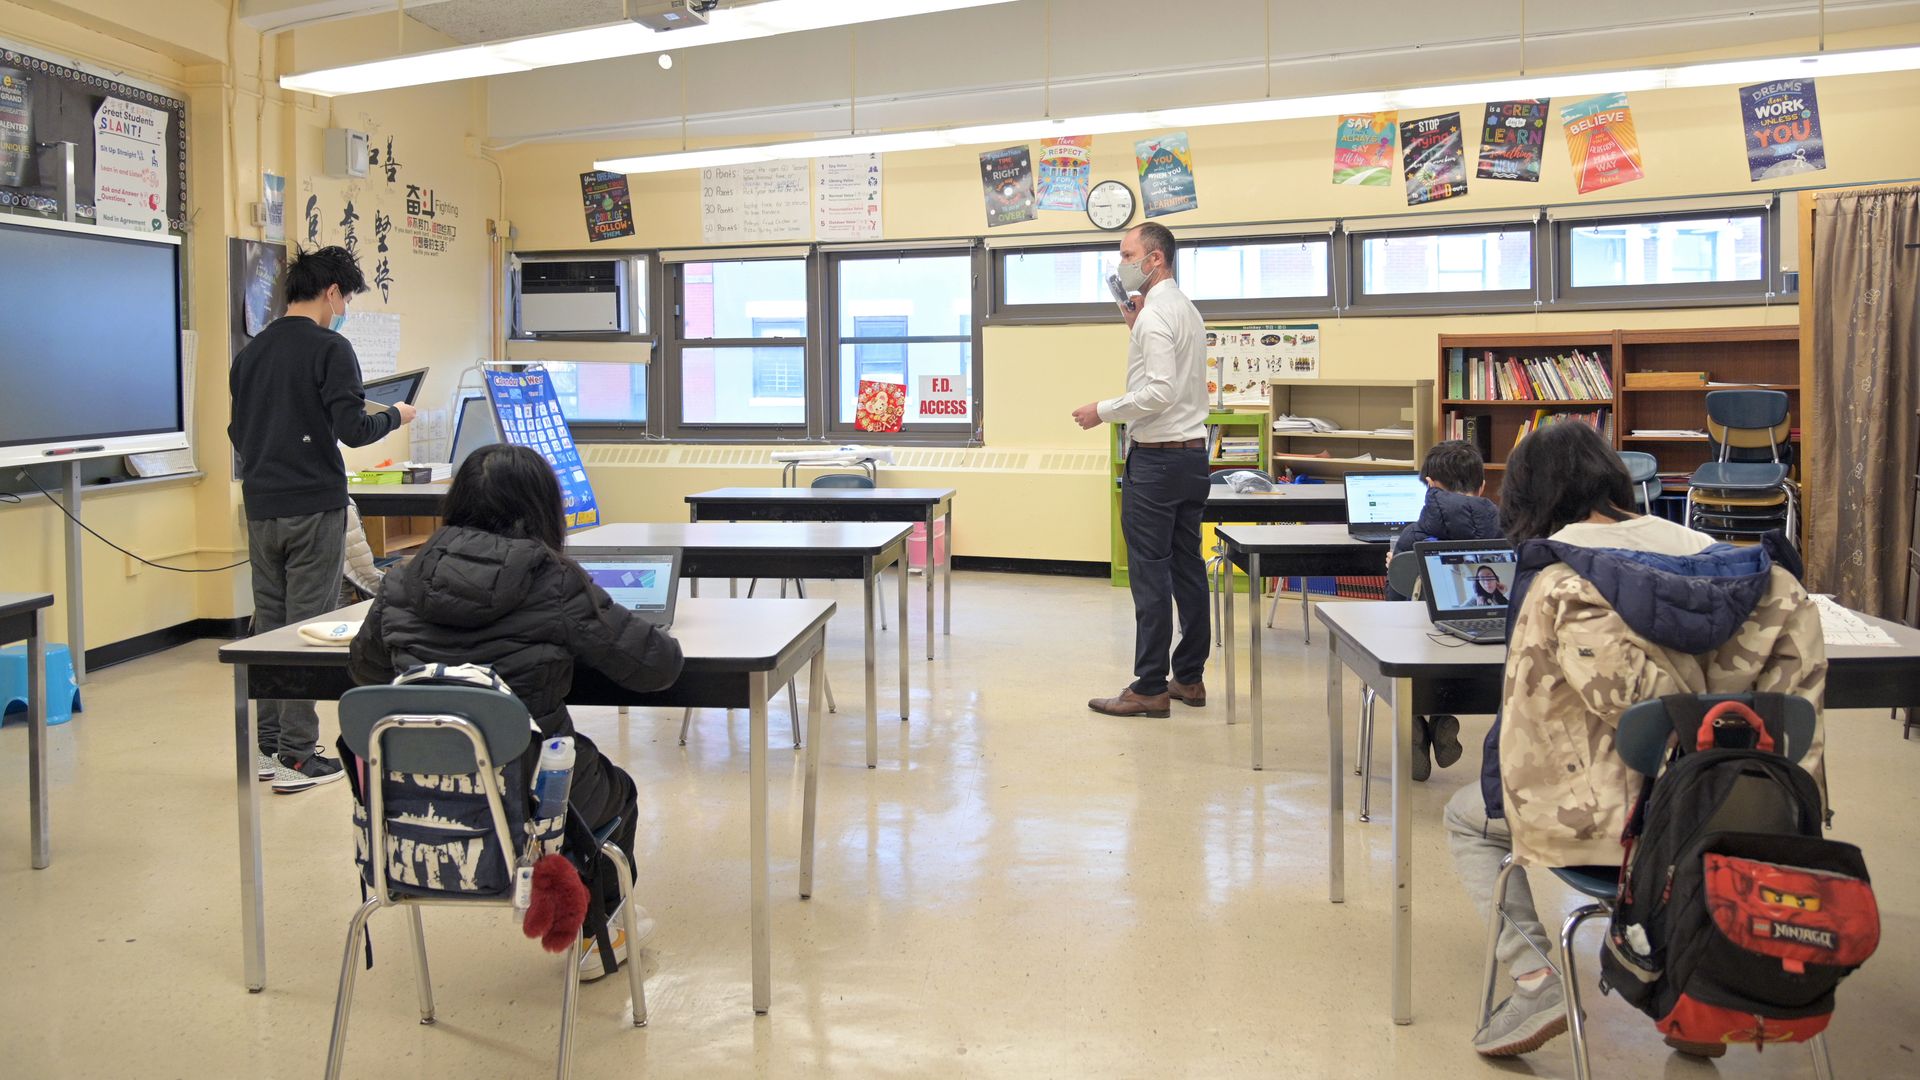 Principal Ben Geballe (C) helps students settle into a classroom at Sun Yat Sen M.S. 131 on February 25, 2021 in New York City.